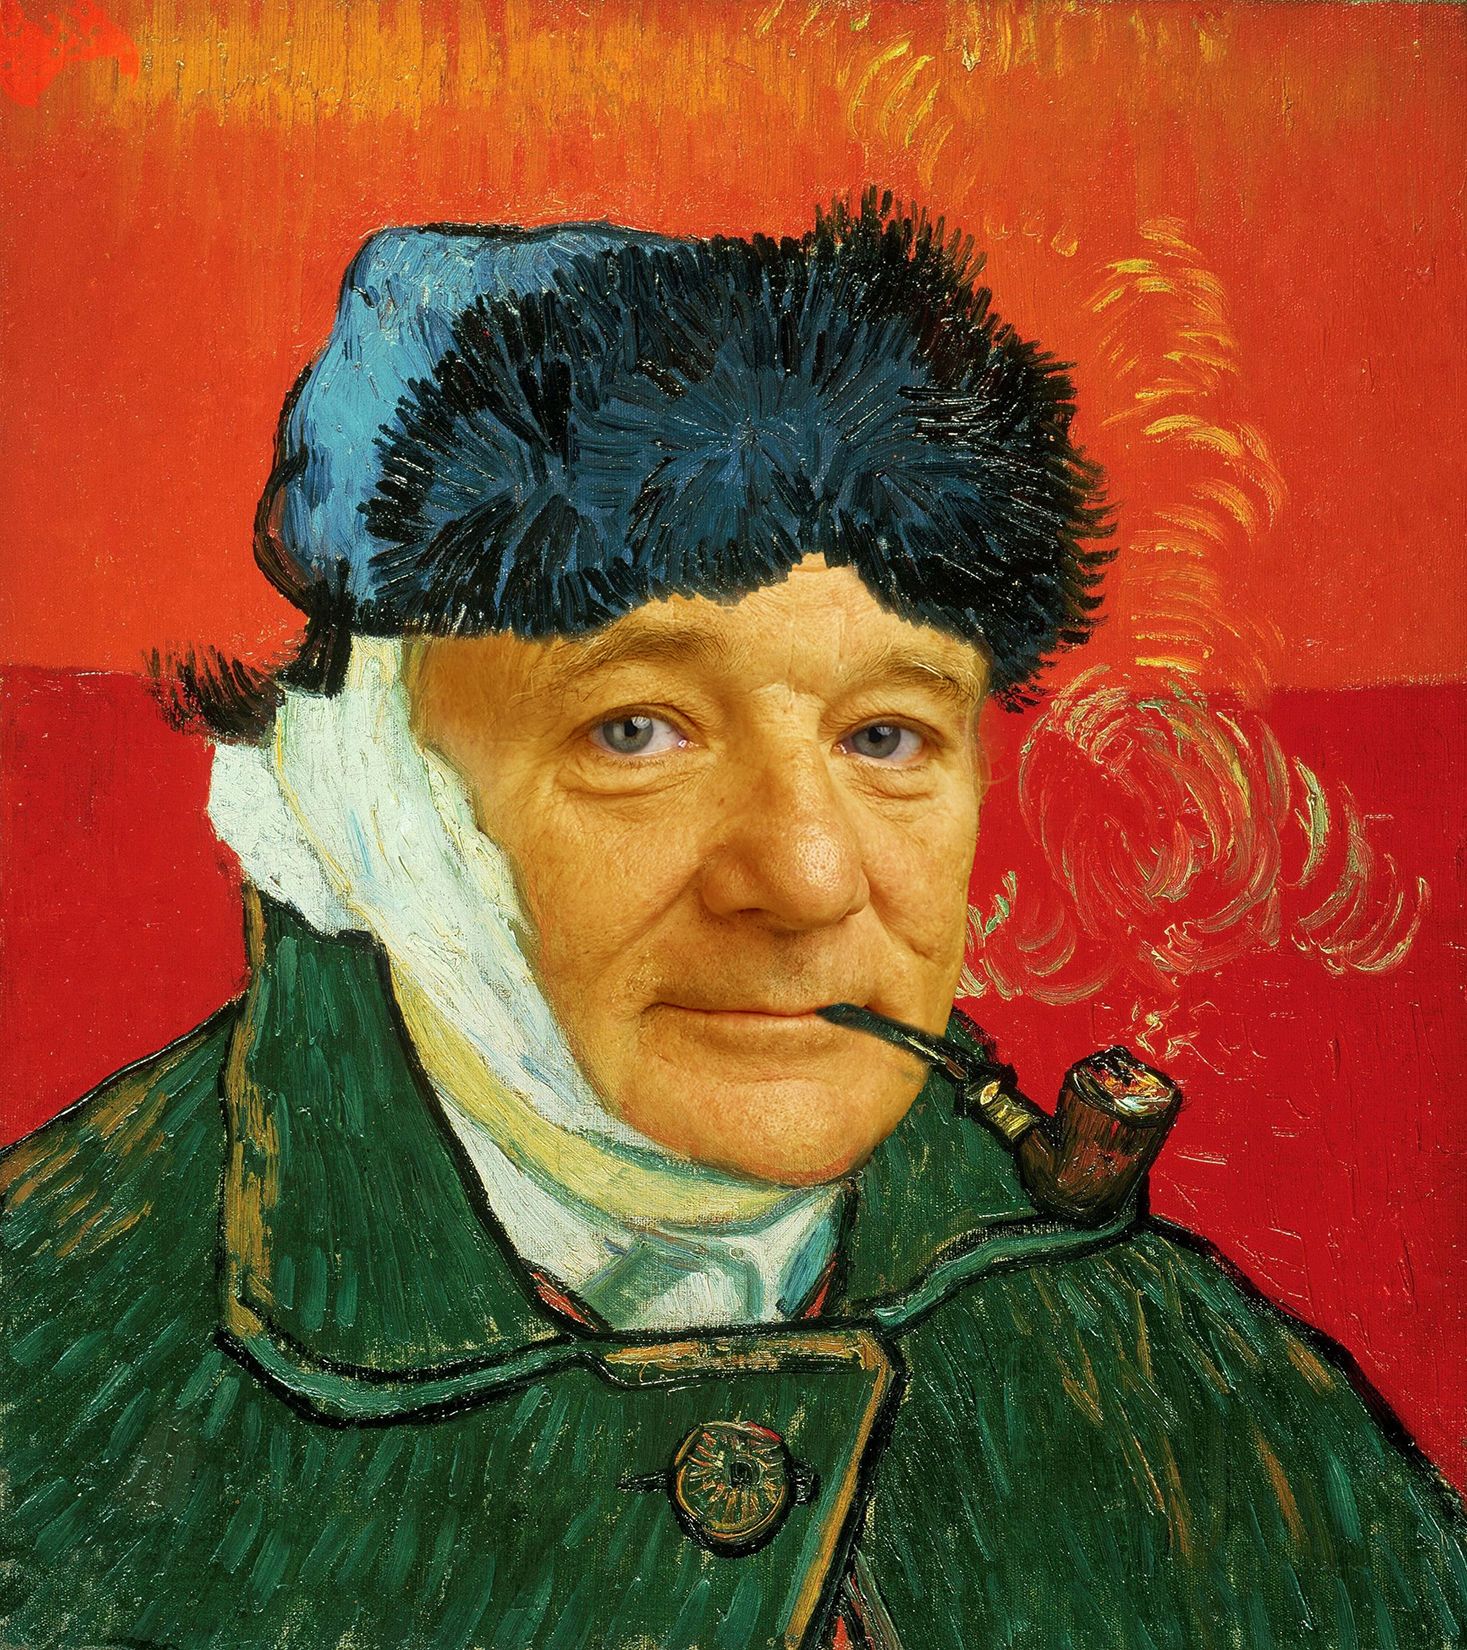 bill murray in famous painting